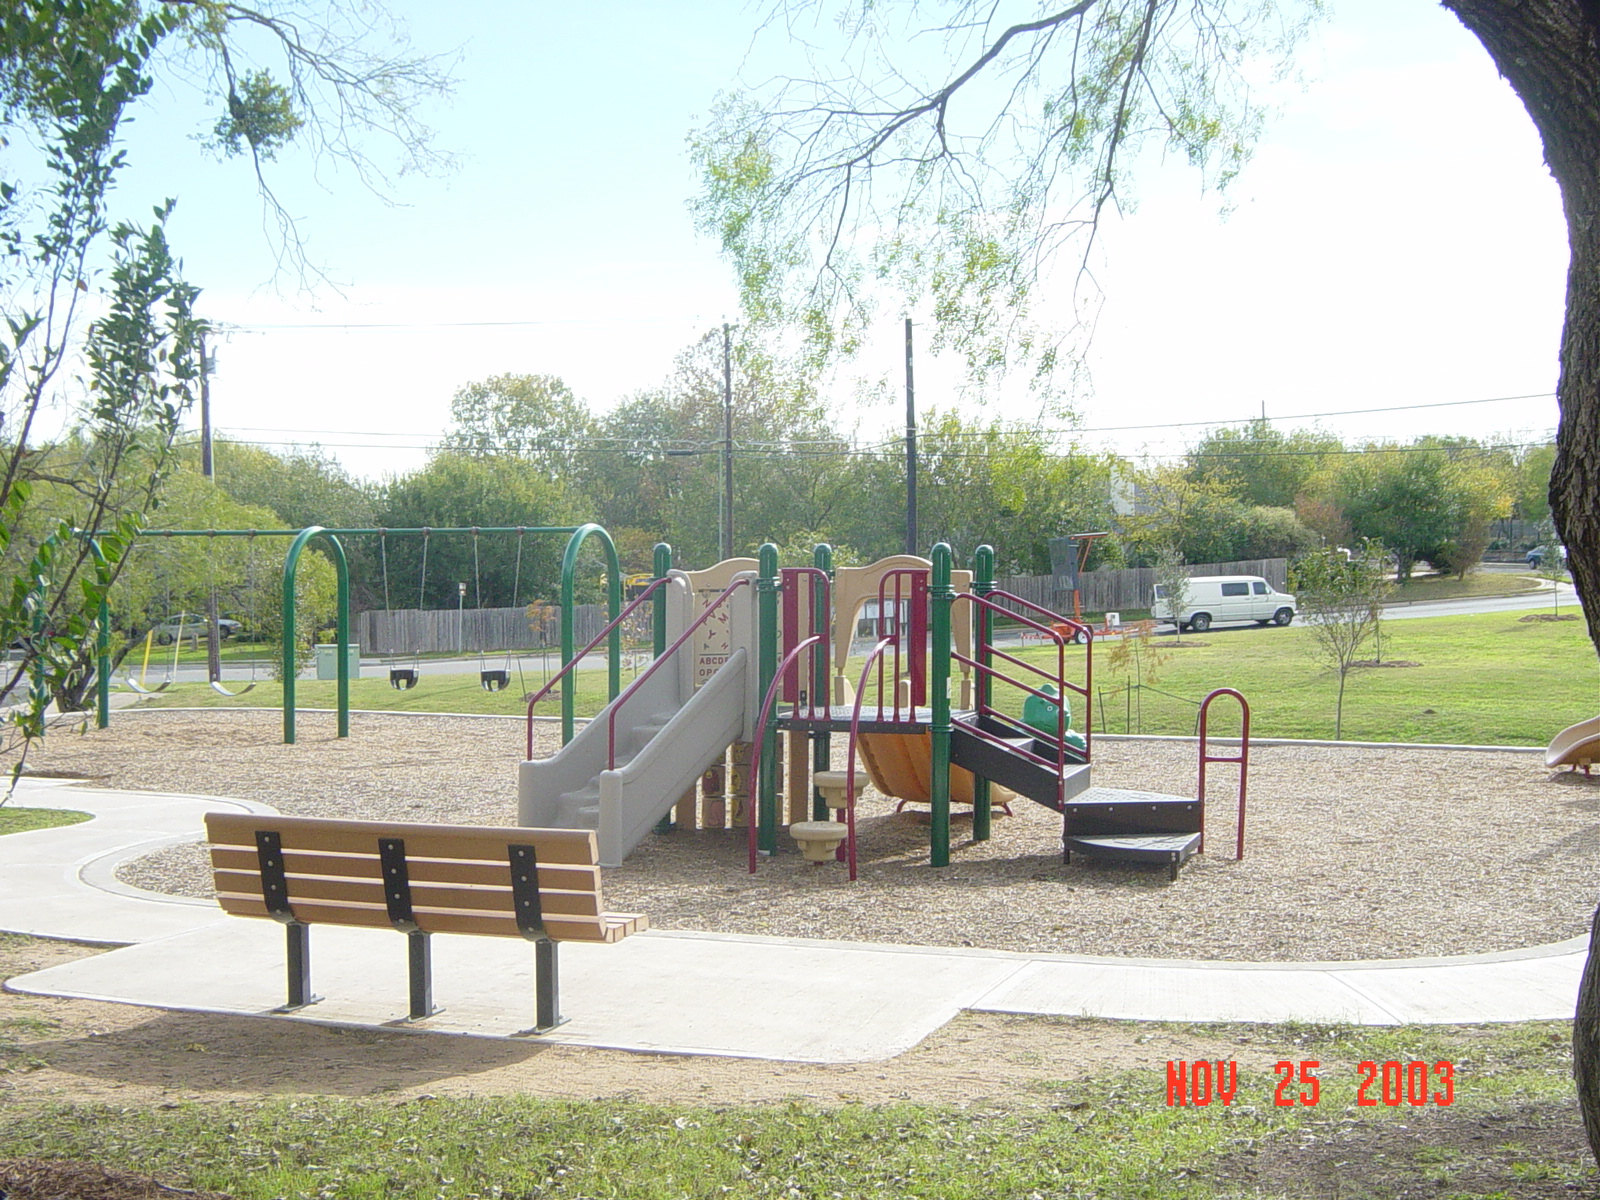 a small playground set with some s playing on the slide